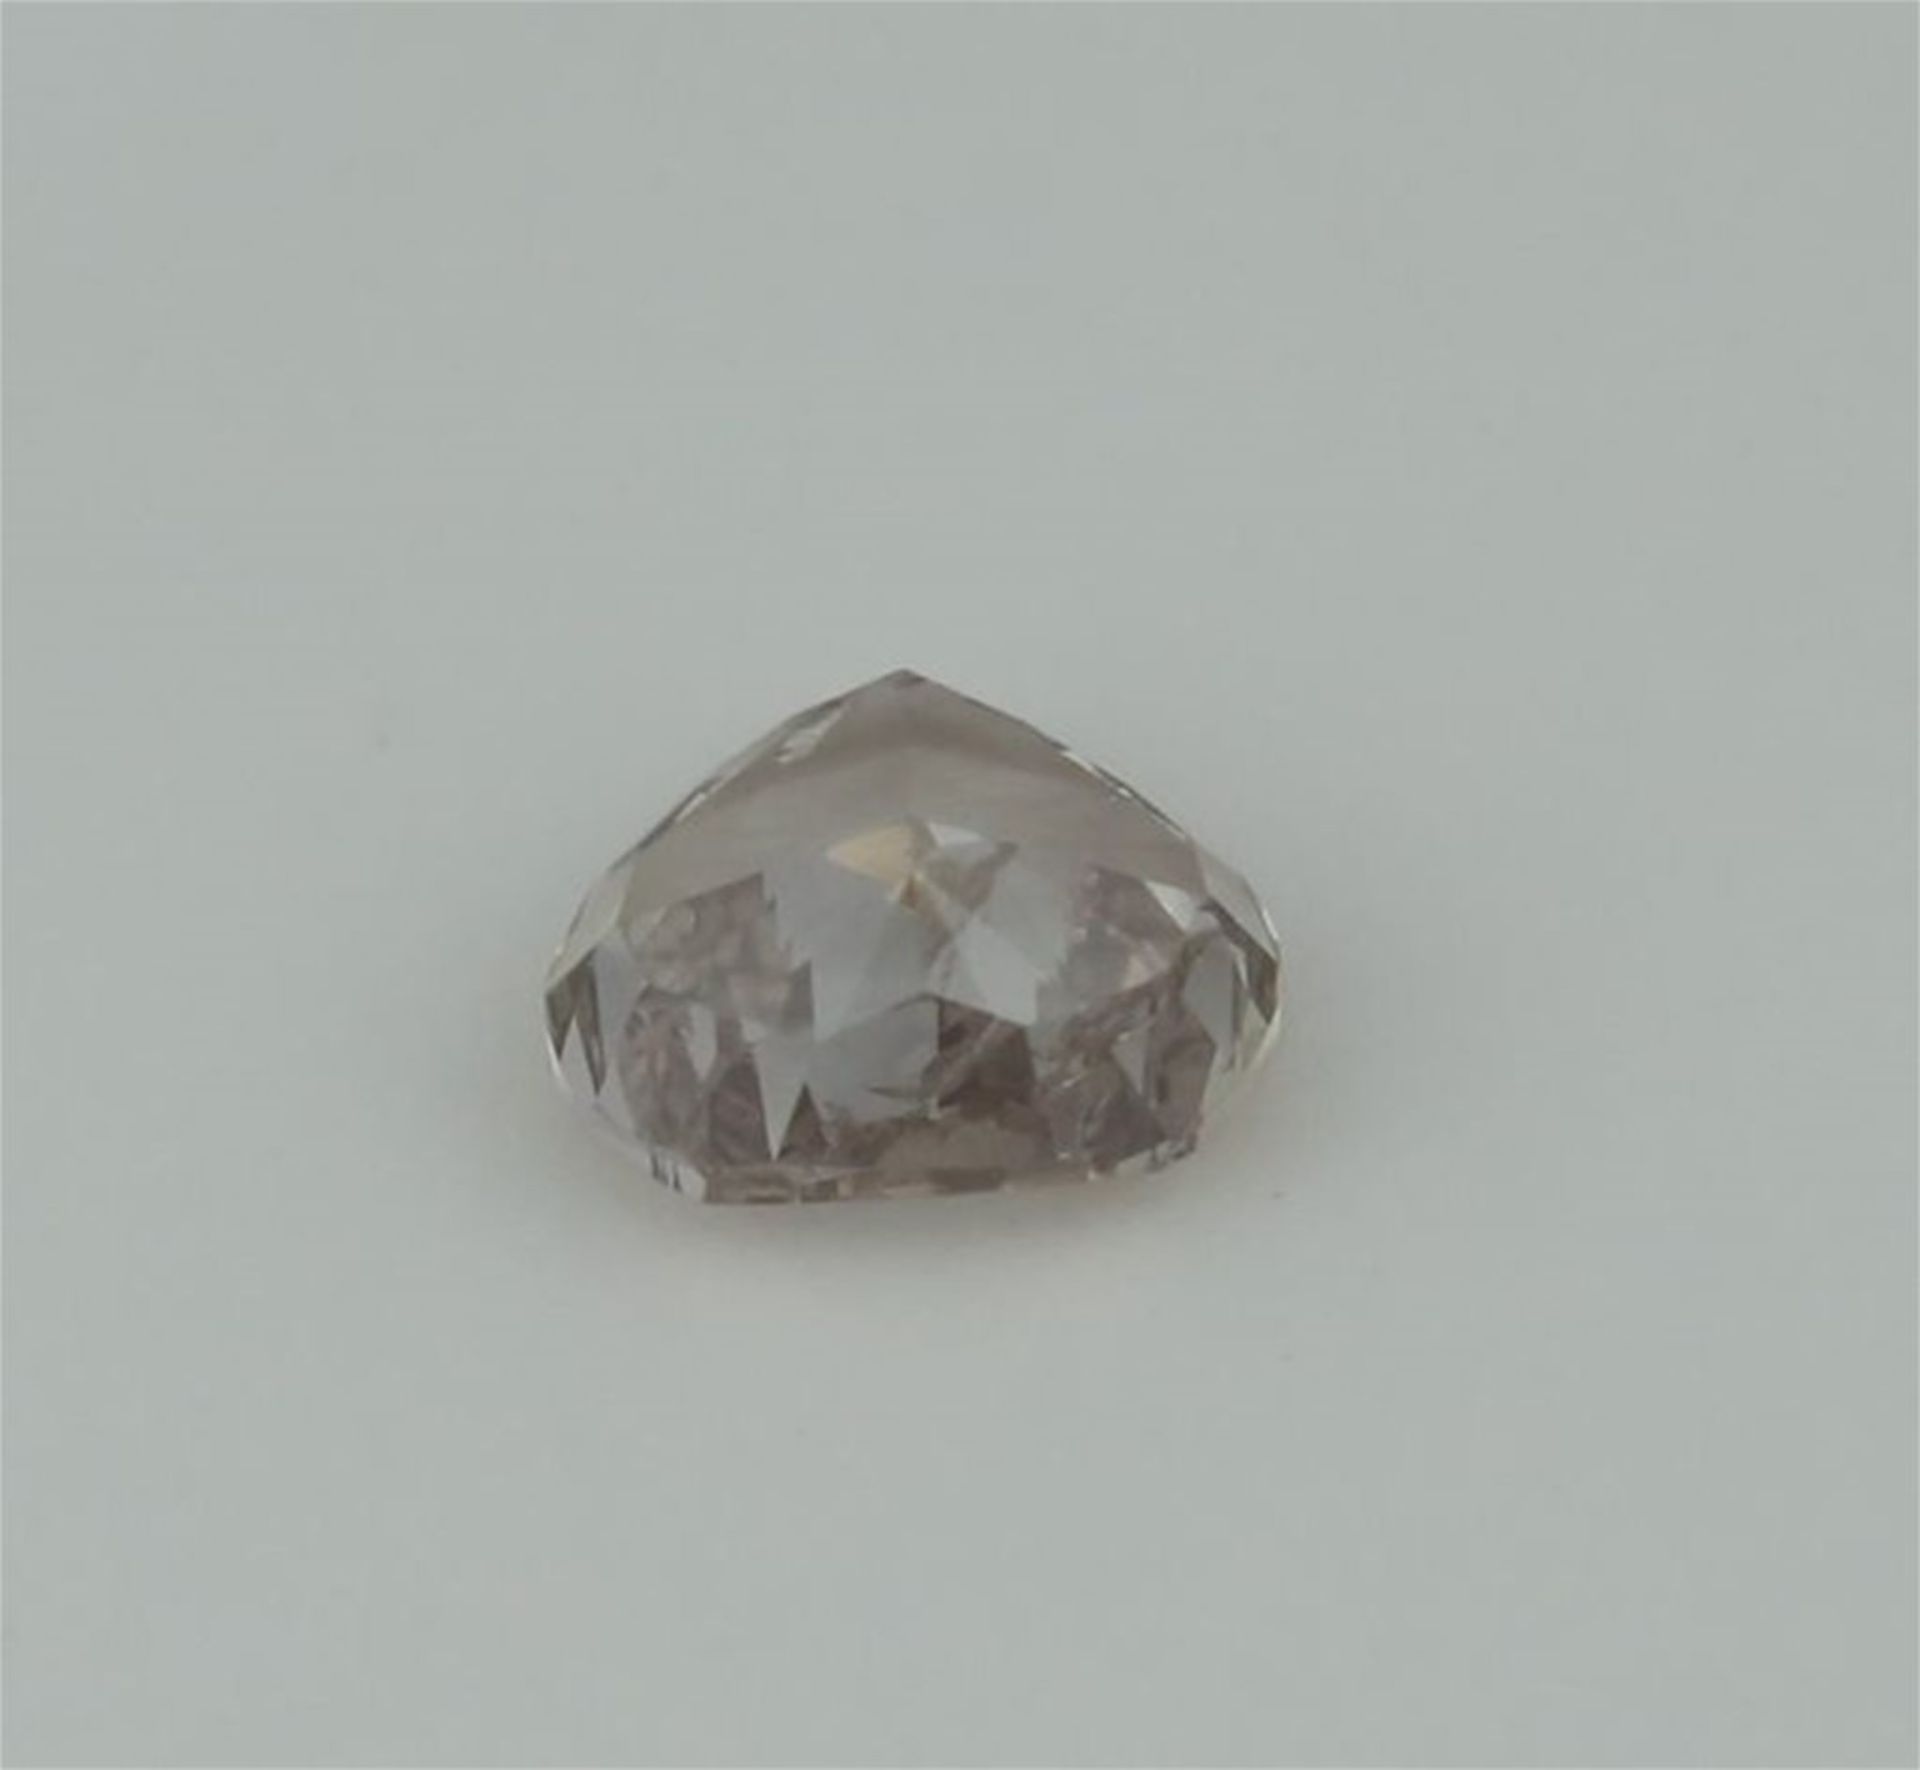 IGI Certified 0.52 ct. Pear Modified Brilliant Diamond - Very Light Brown - SI 2 UNTREATED - Image 8 of 9